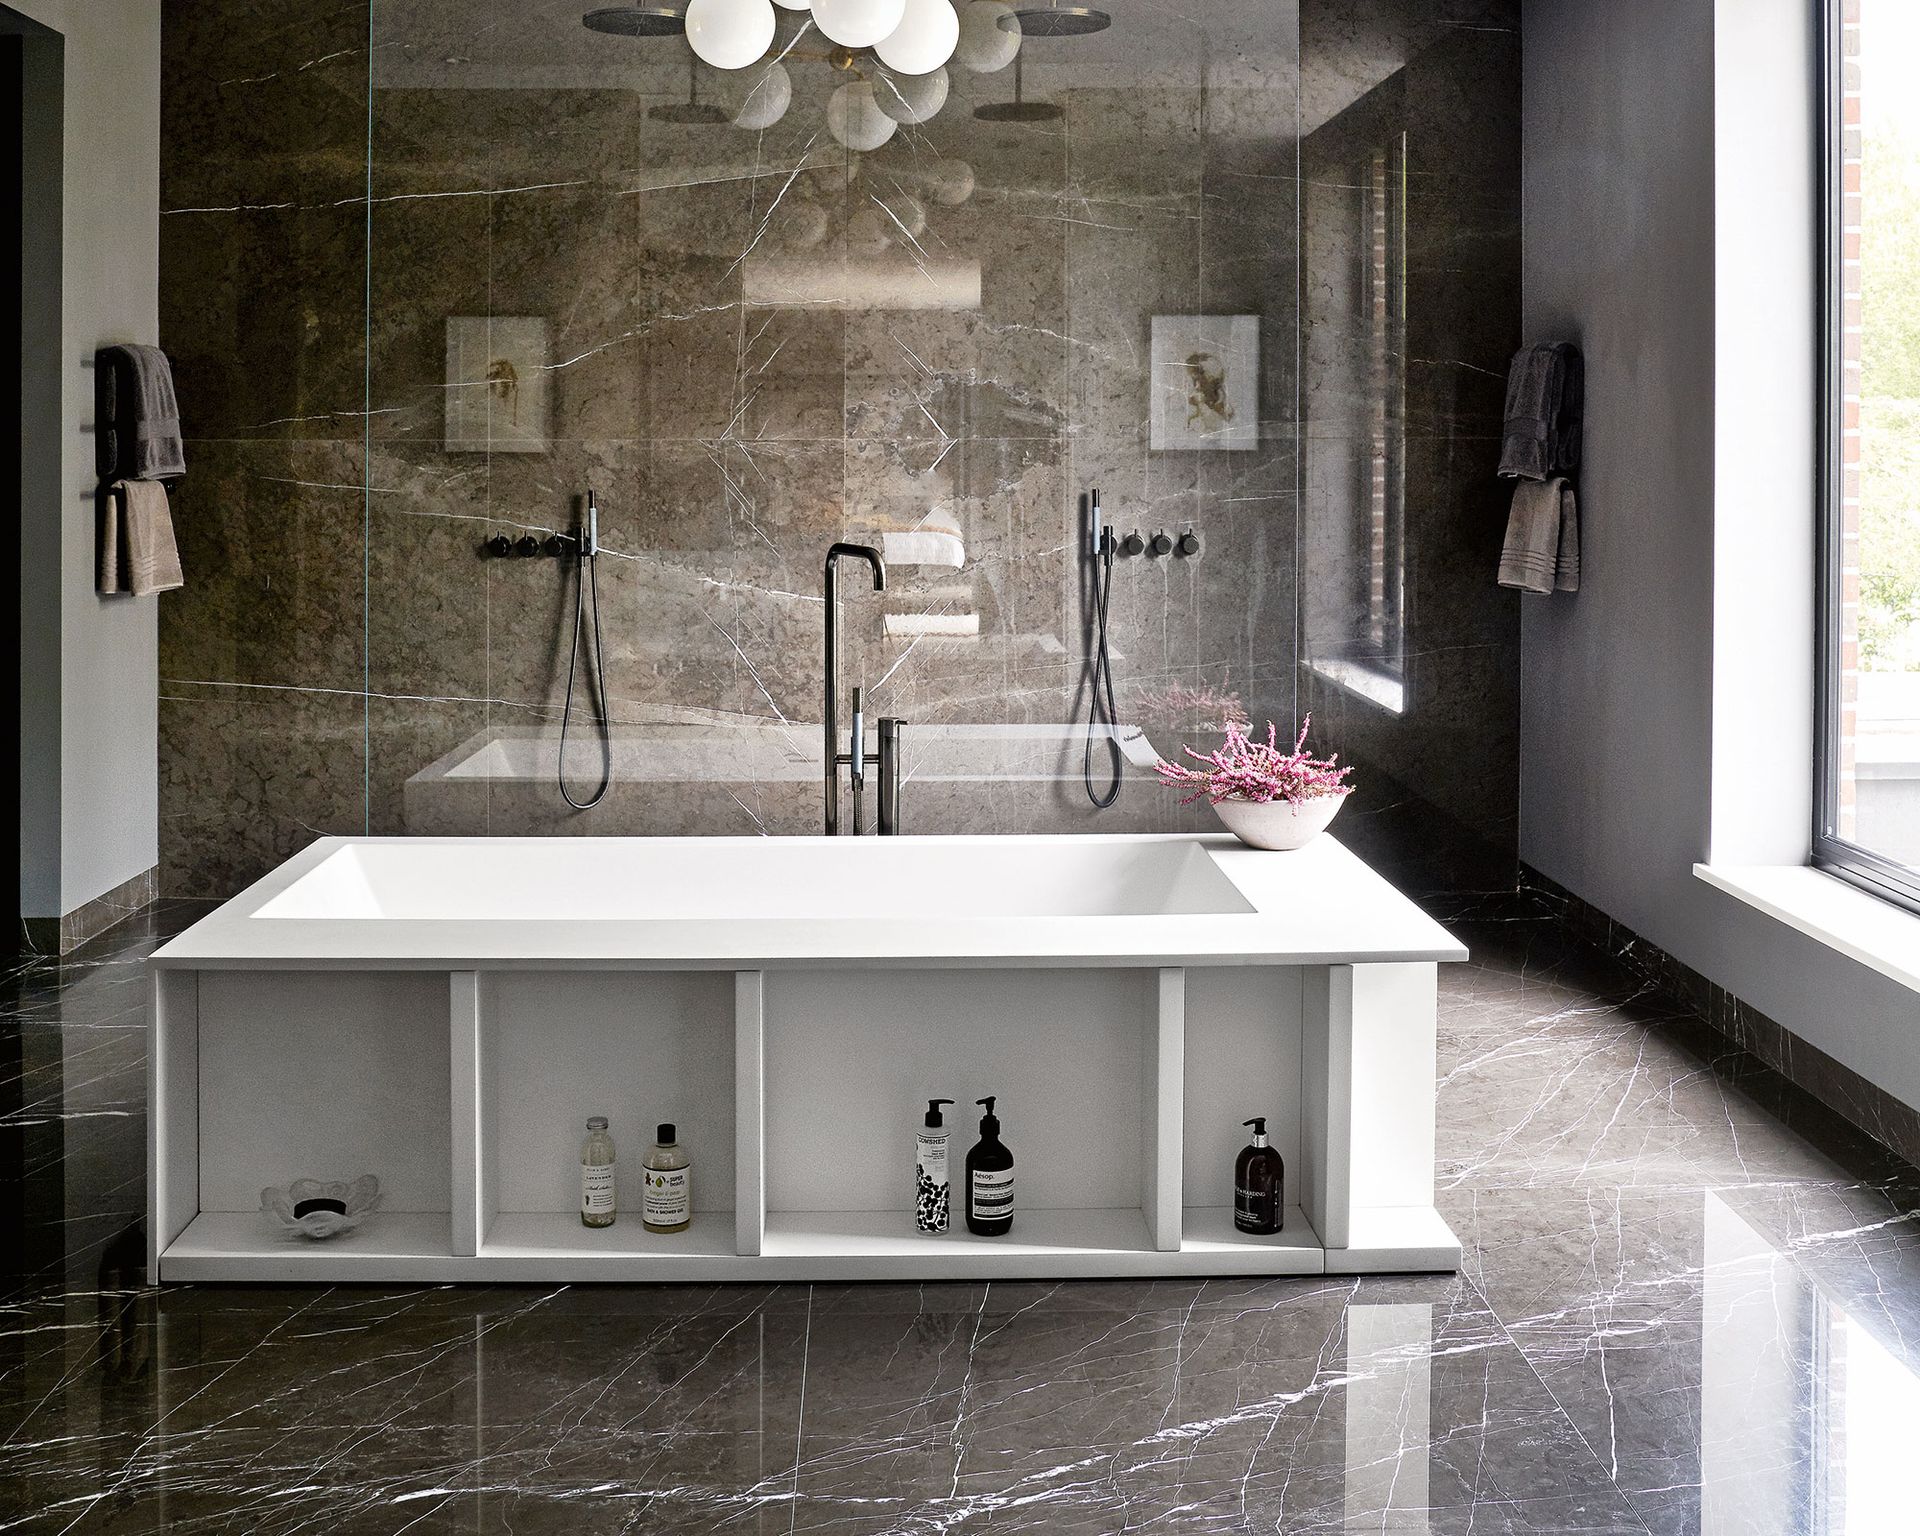 <p>                     Designed to steal the show and provide a luxurious deep soak, a well-chosen bath will prove a seriously good investment in a luxury bathroom scheme. Whether made from solid stone, classic cast iron or modern composite resin, statement baths are built to impress – and their desirability has soared in recent years.                   </p>                                      <p>                      ‘These designs are synonymous with luxury and clients love the spacious bathing experience,’ says Joy Chesterton of Ripples. Most statement baths are made to be positioned away from walls; a central location has extra glamor and can boost the room’s sense of proportion.                    </p>                                      <p>                     ’Symmetry and balance are key to creating an elegant, serene interior,’ says Lucy Powell of Bathrooms.com. ‘Installing a really eye-catching bath in the middle of the room will provide a central axis that works as a natural focal point.’                   </p>